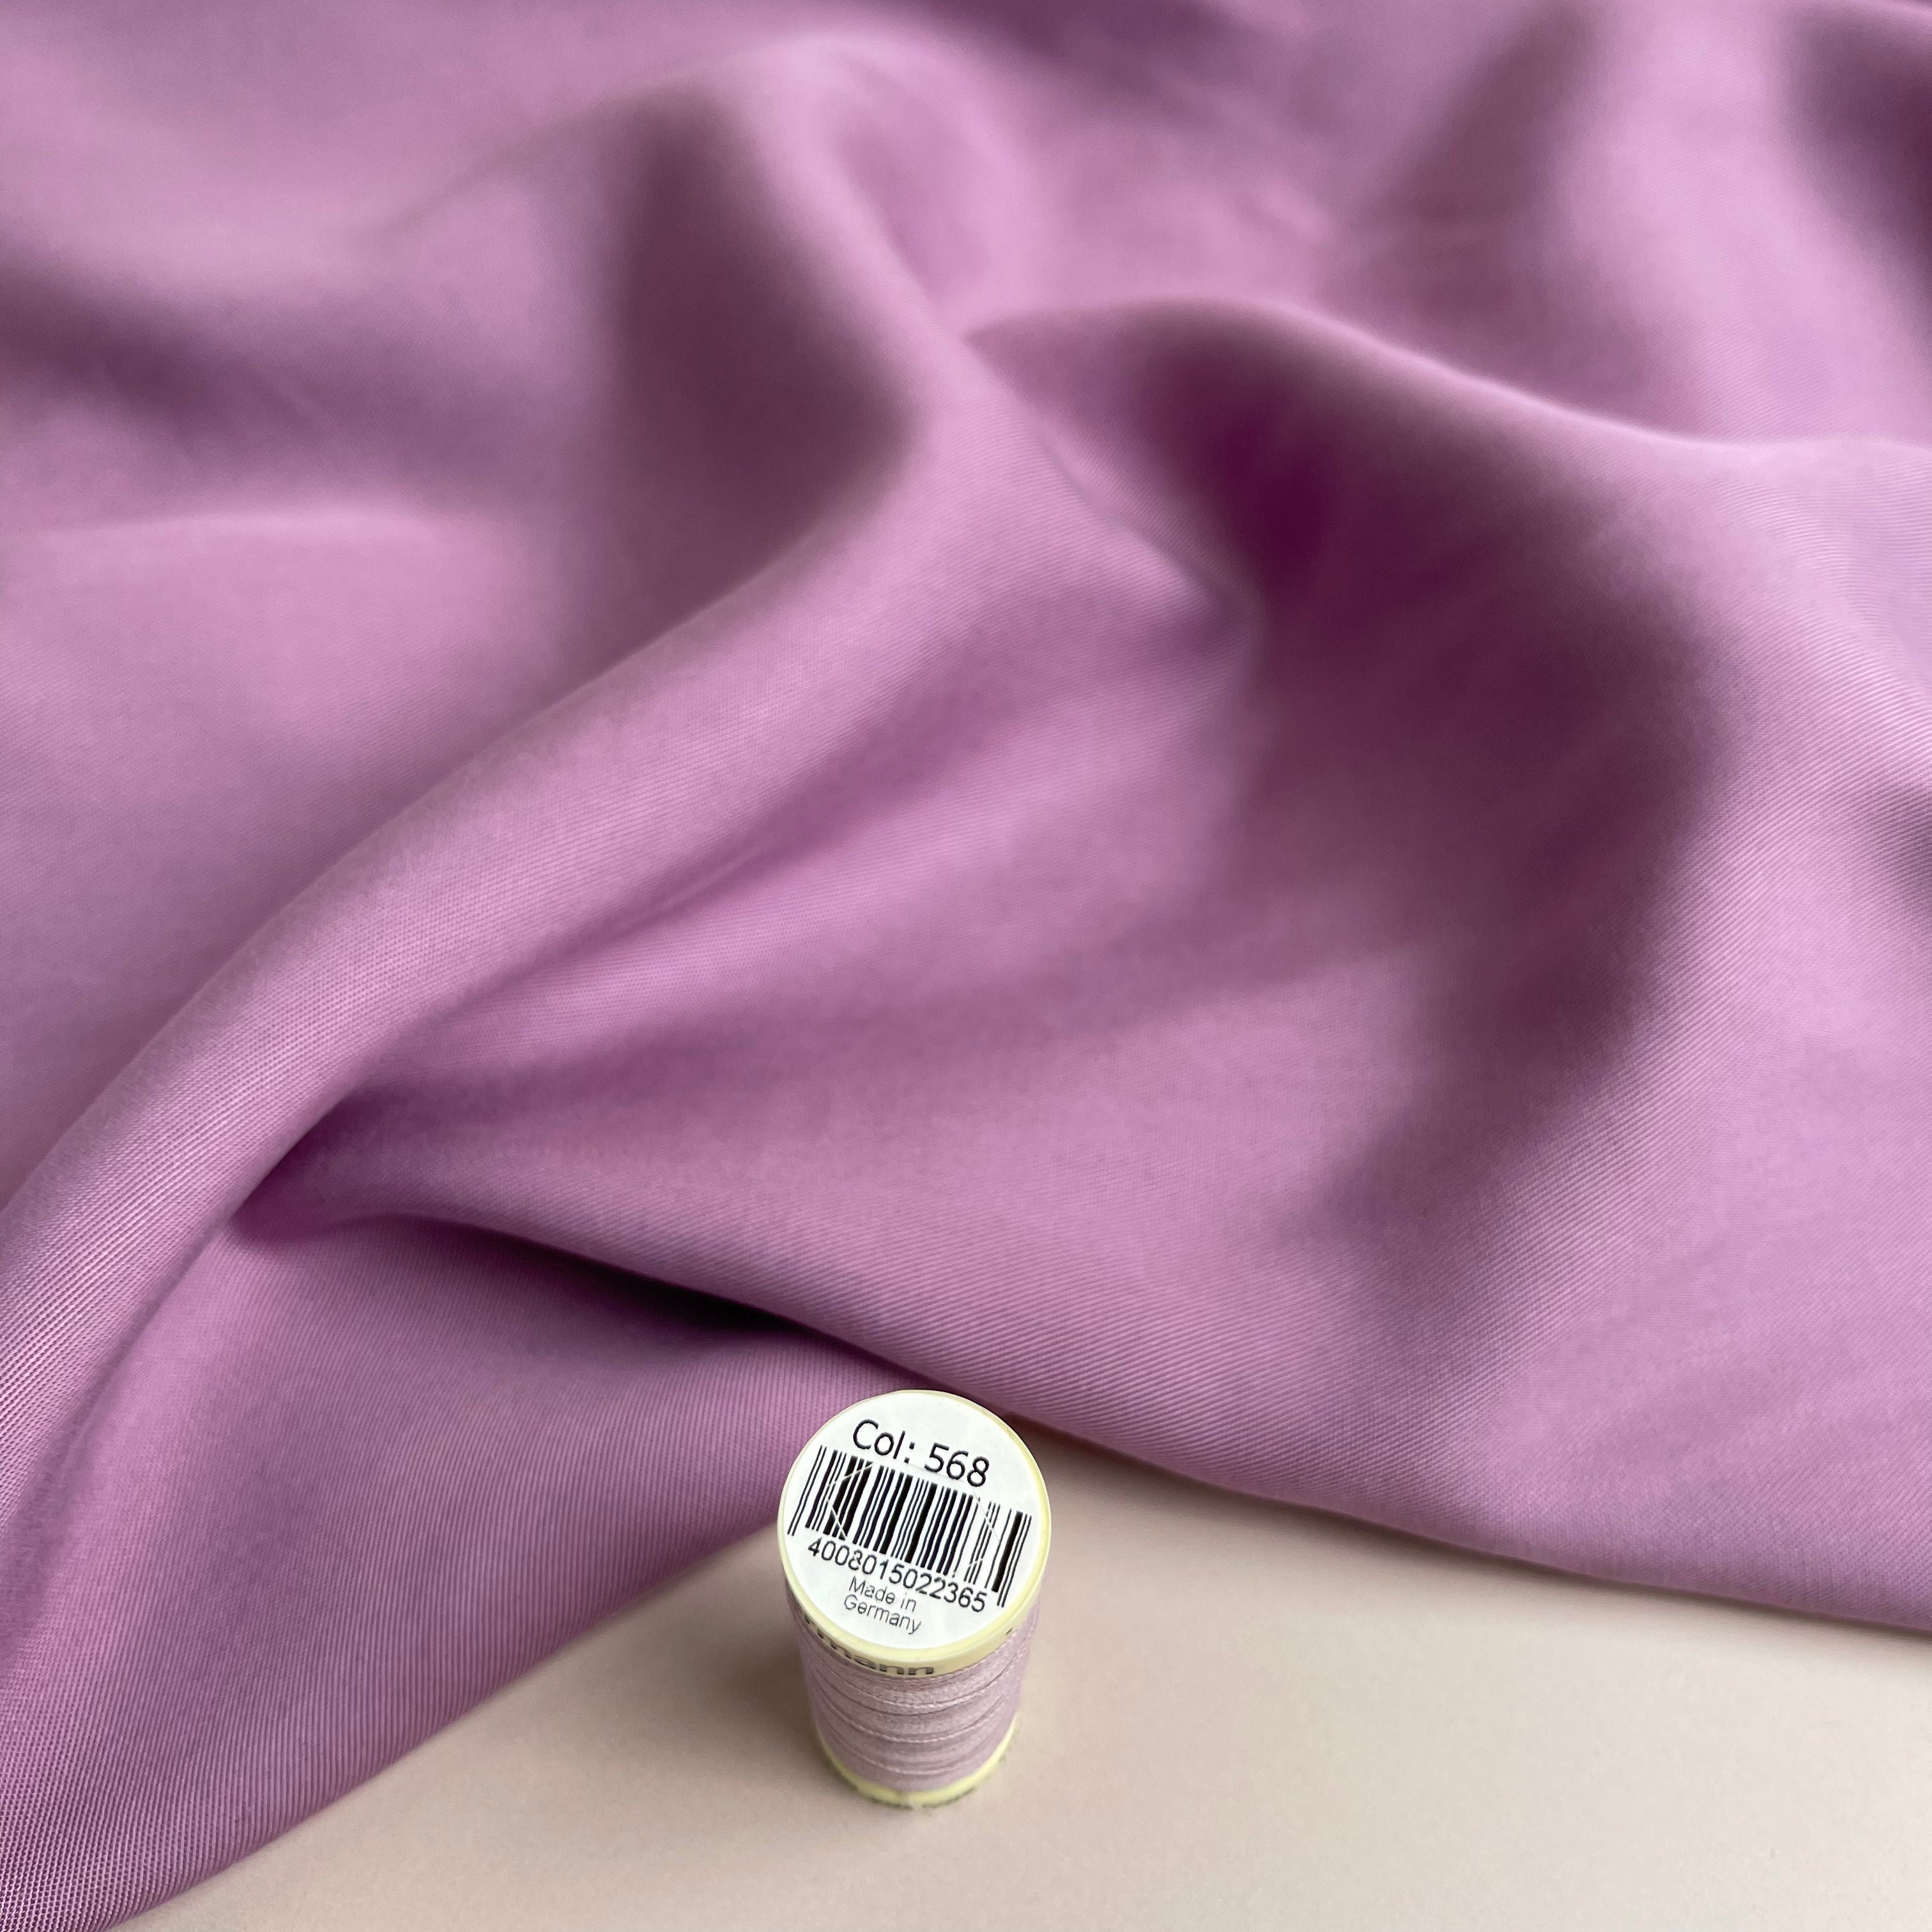 REMNANT 0.61 Metre - Lush Sandwashed Lyocell Twill in Lilac